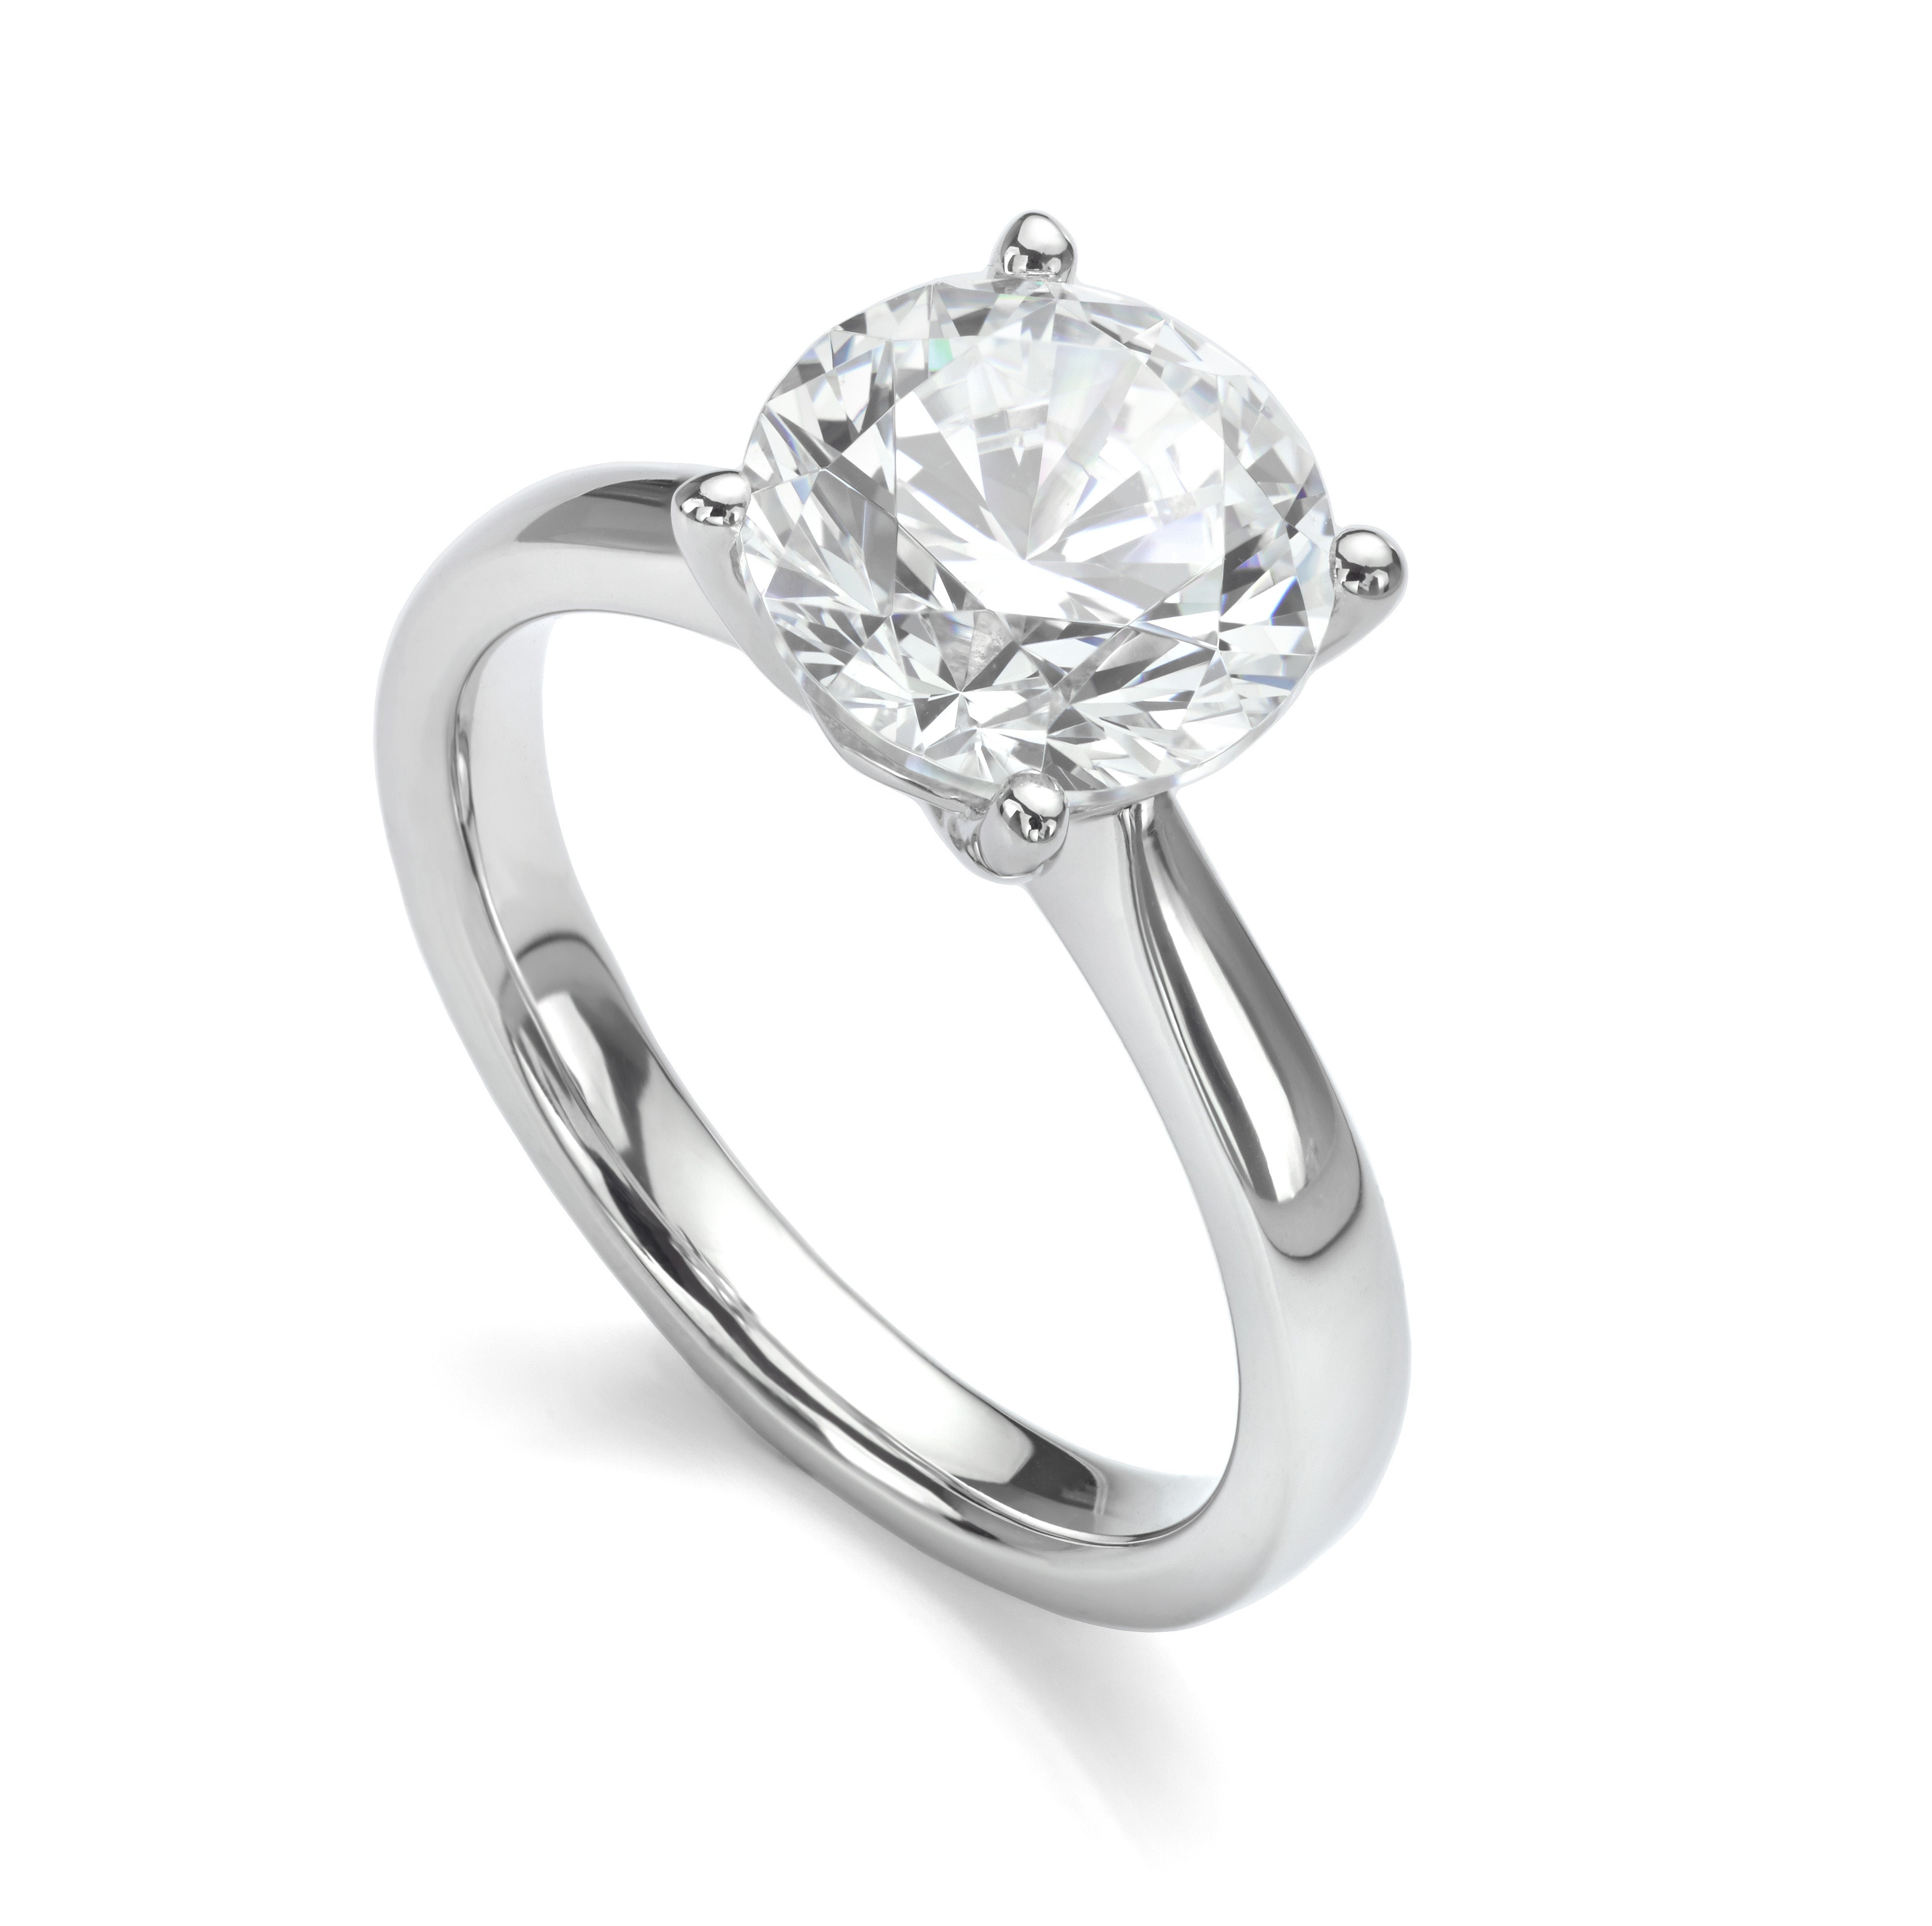 The Clasic Solitaire Engagement Ring - Wildsmith Jewellery Bespoke Engagement Ring The Clasic Solitaire Engagement Ring Wildsmith Jewellery Bespoke Engagement Ring